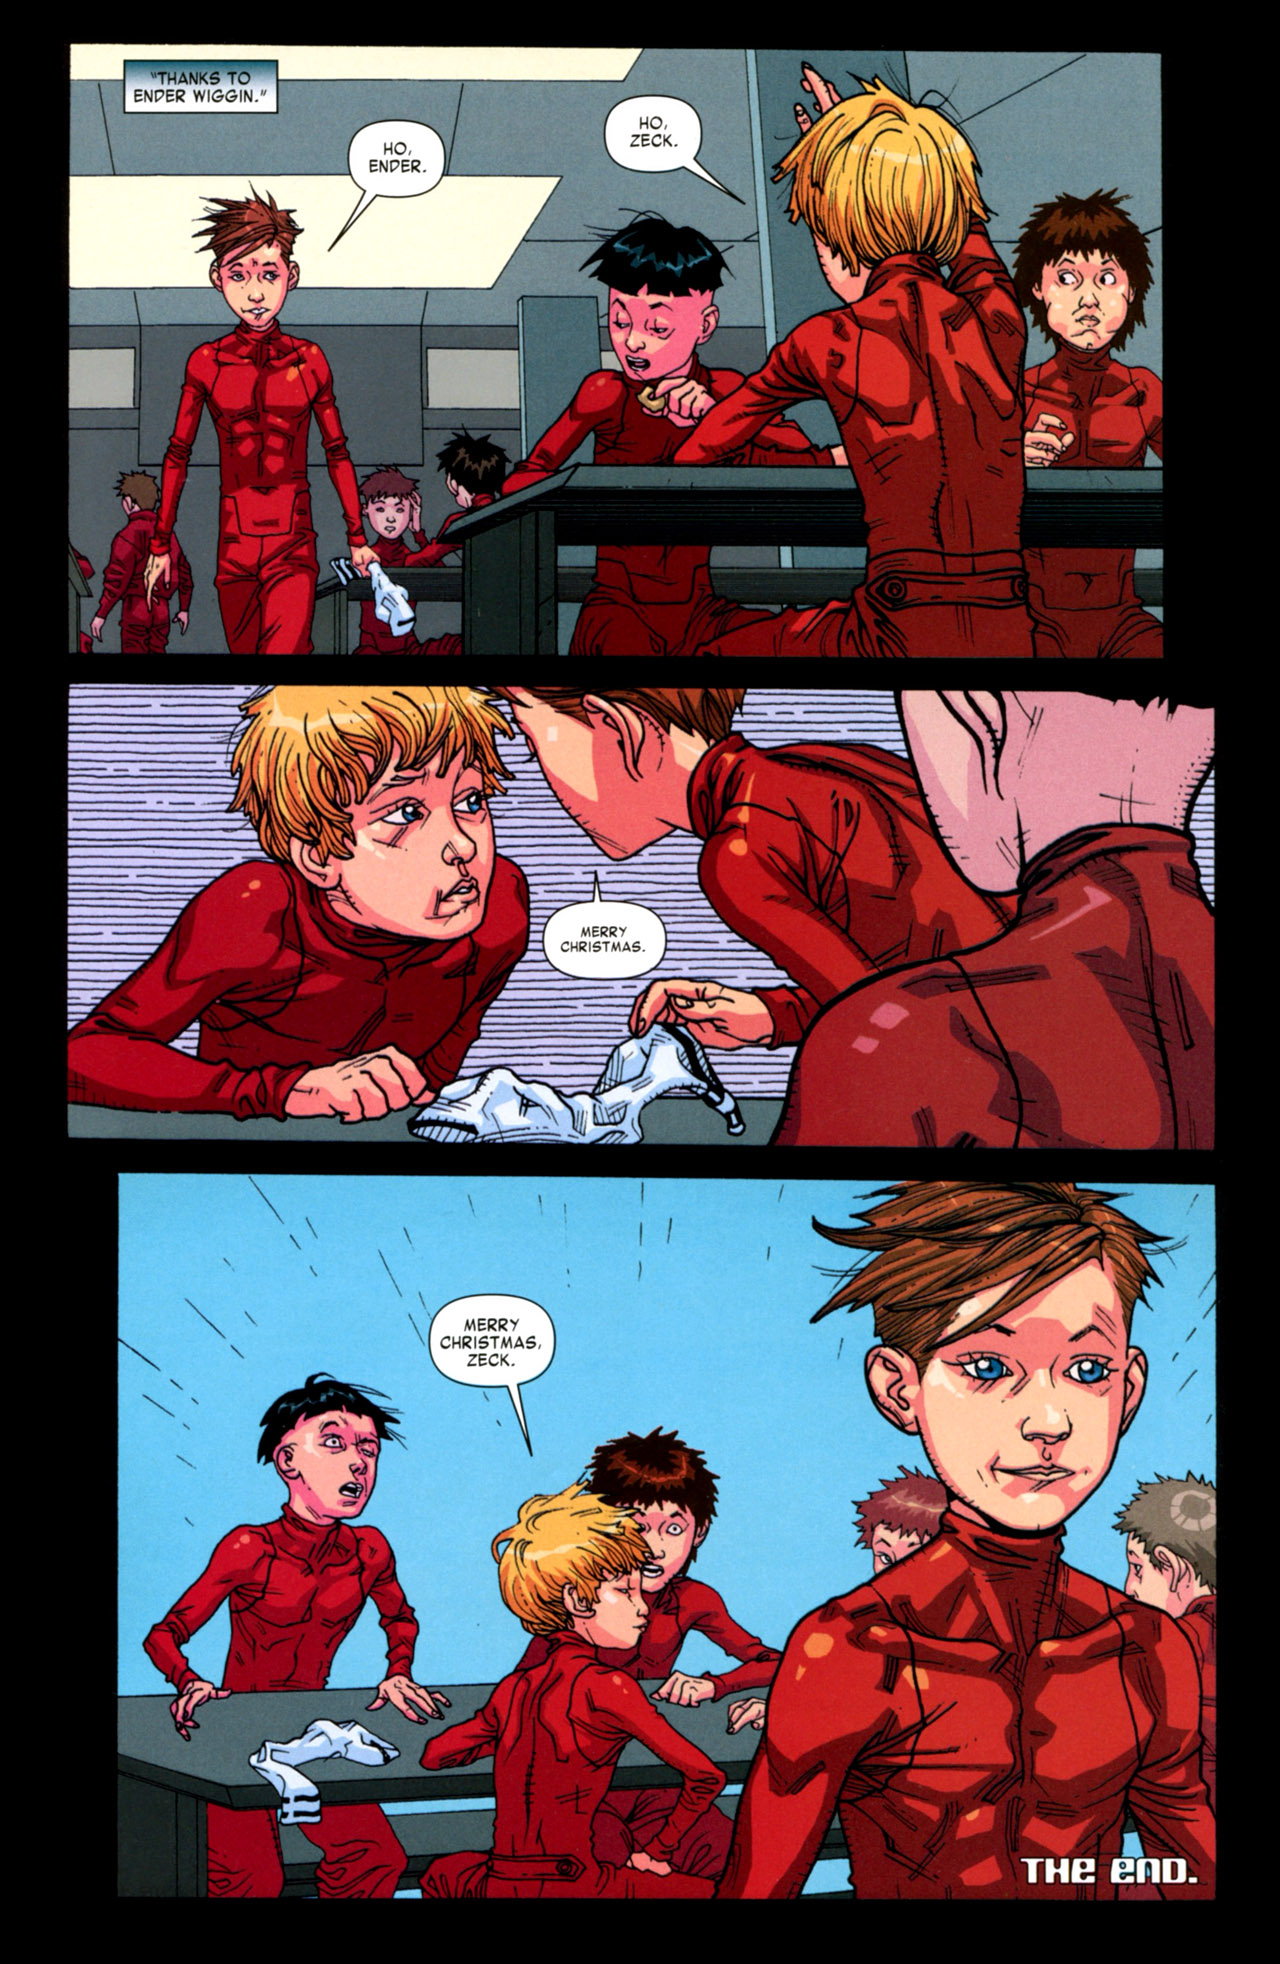 Read online Ender's Game: War of Gifts comic -  Issue # Full - 47